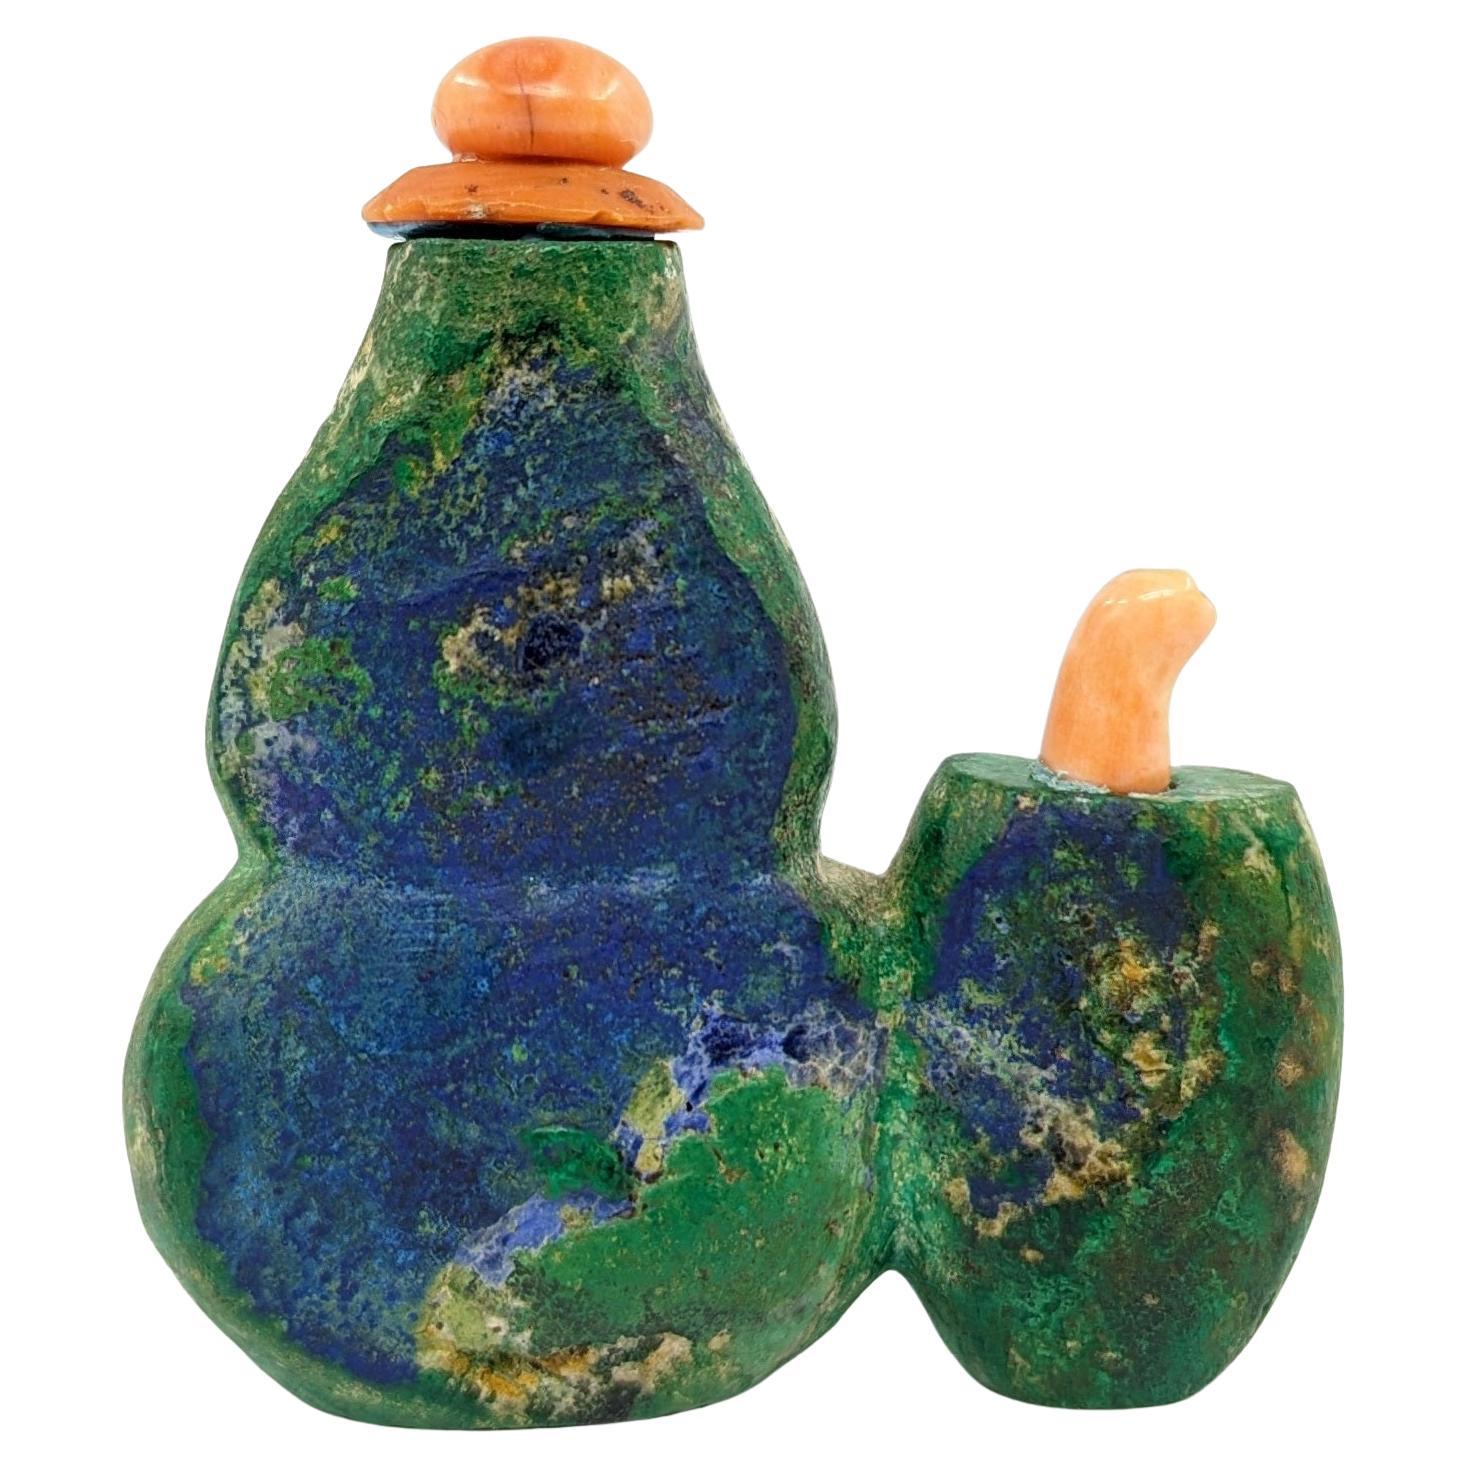 Rare Antique Chinese Azurite Malachite Double Snuff Bottle 19c Qing Dynasty For Sale